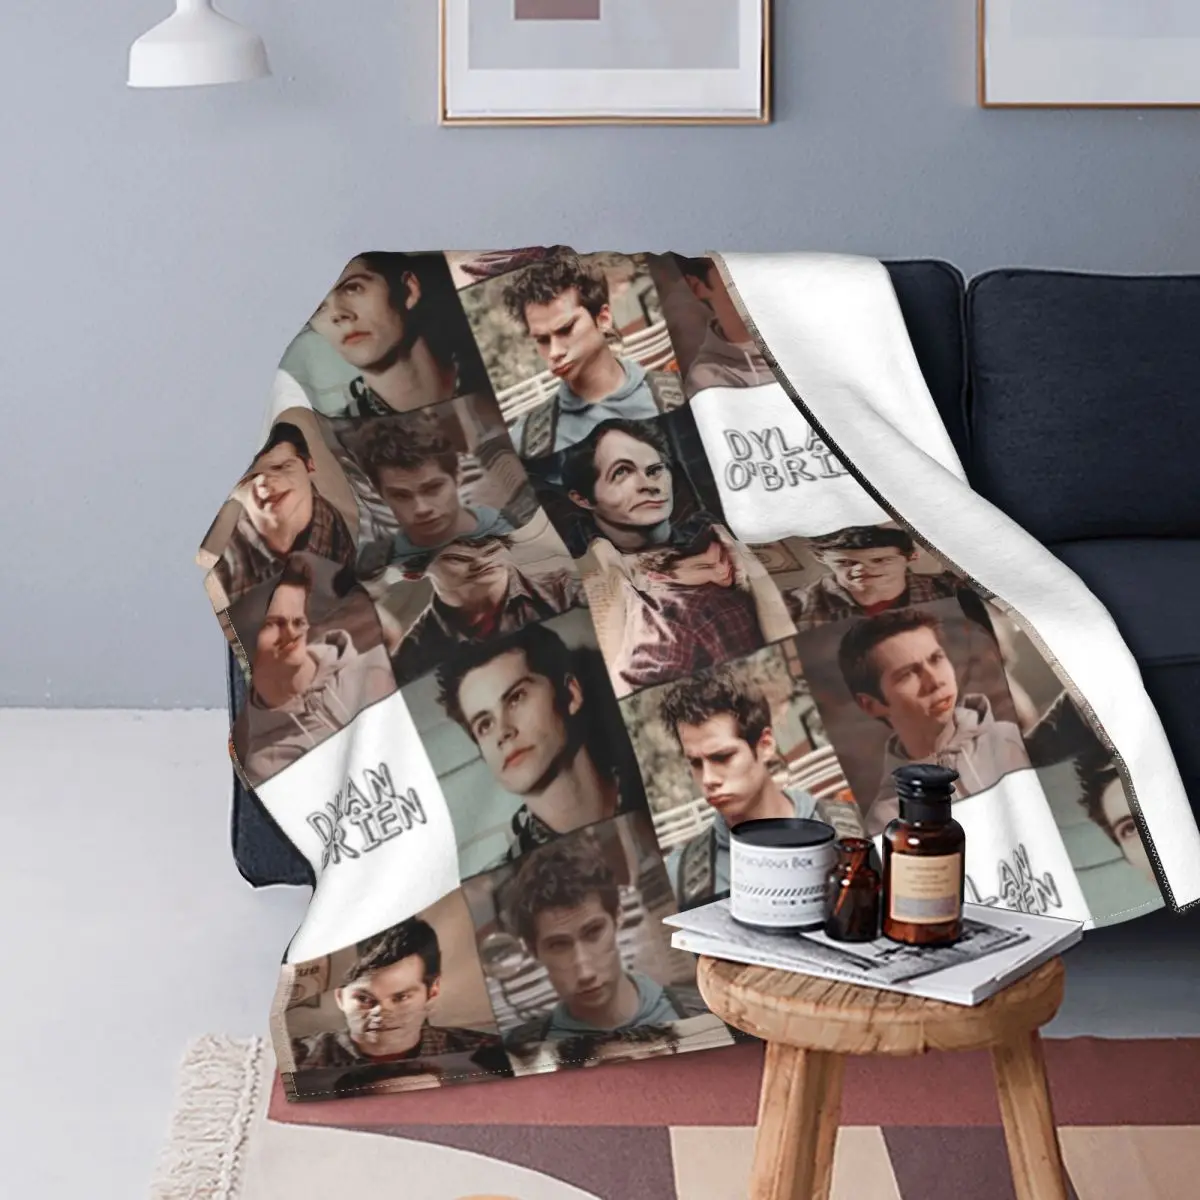 

Dylan O'Brien Flannel Throw Blanket Teen Wolf Stiles Actor Blanket for Home Office Warm Quilt